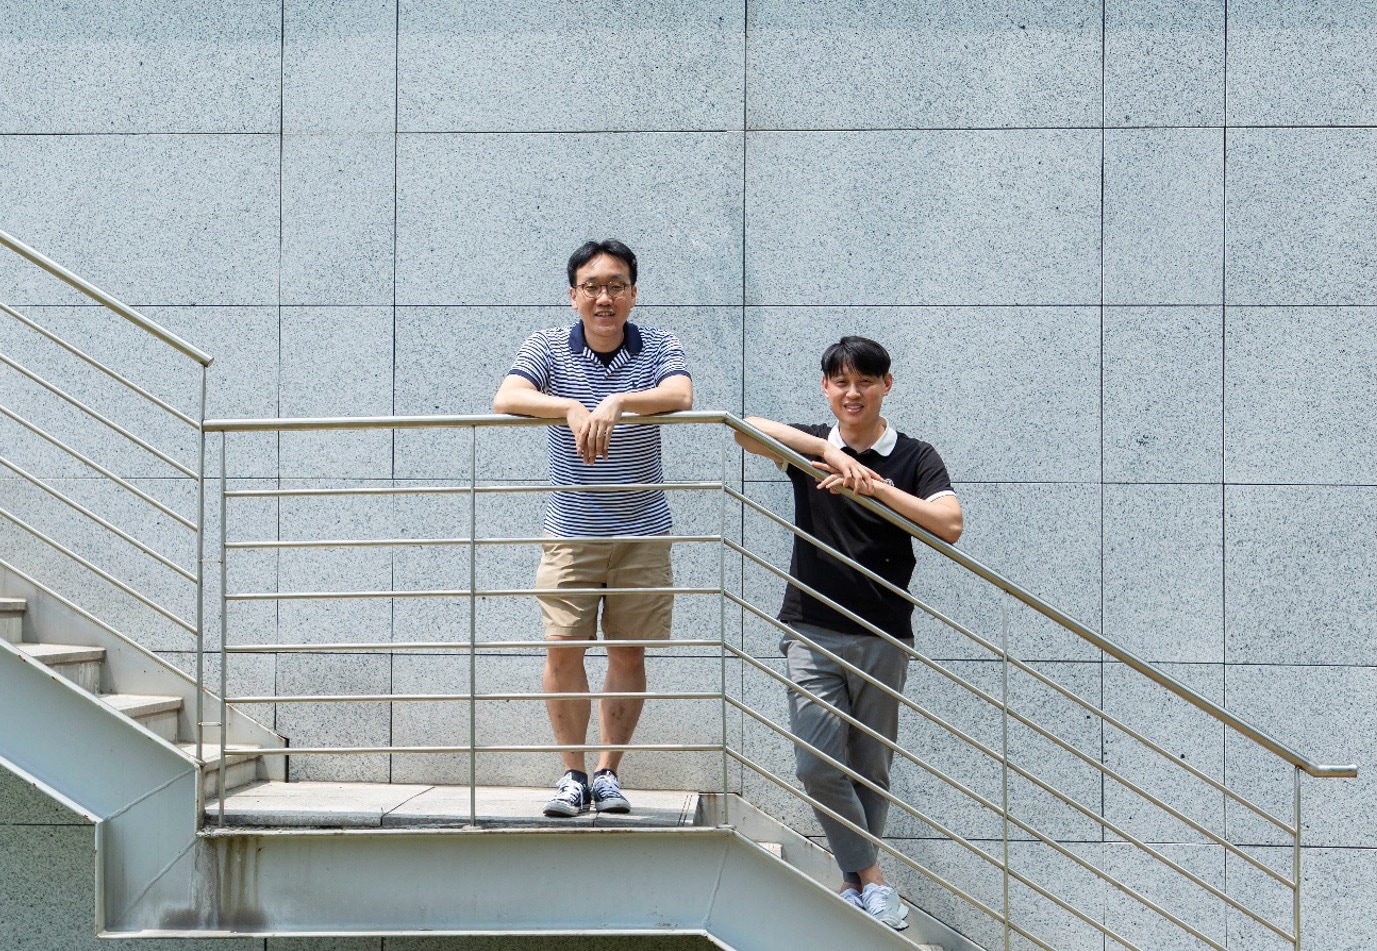 ▲ Sungsoo Choi (left) from the Semiconductor R&D Center and Myoungoh Ki from the Advanced Sensor Development Team in Samsung Electronics’ System LSI business that developed the ISOCELL HP3.